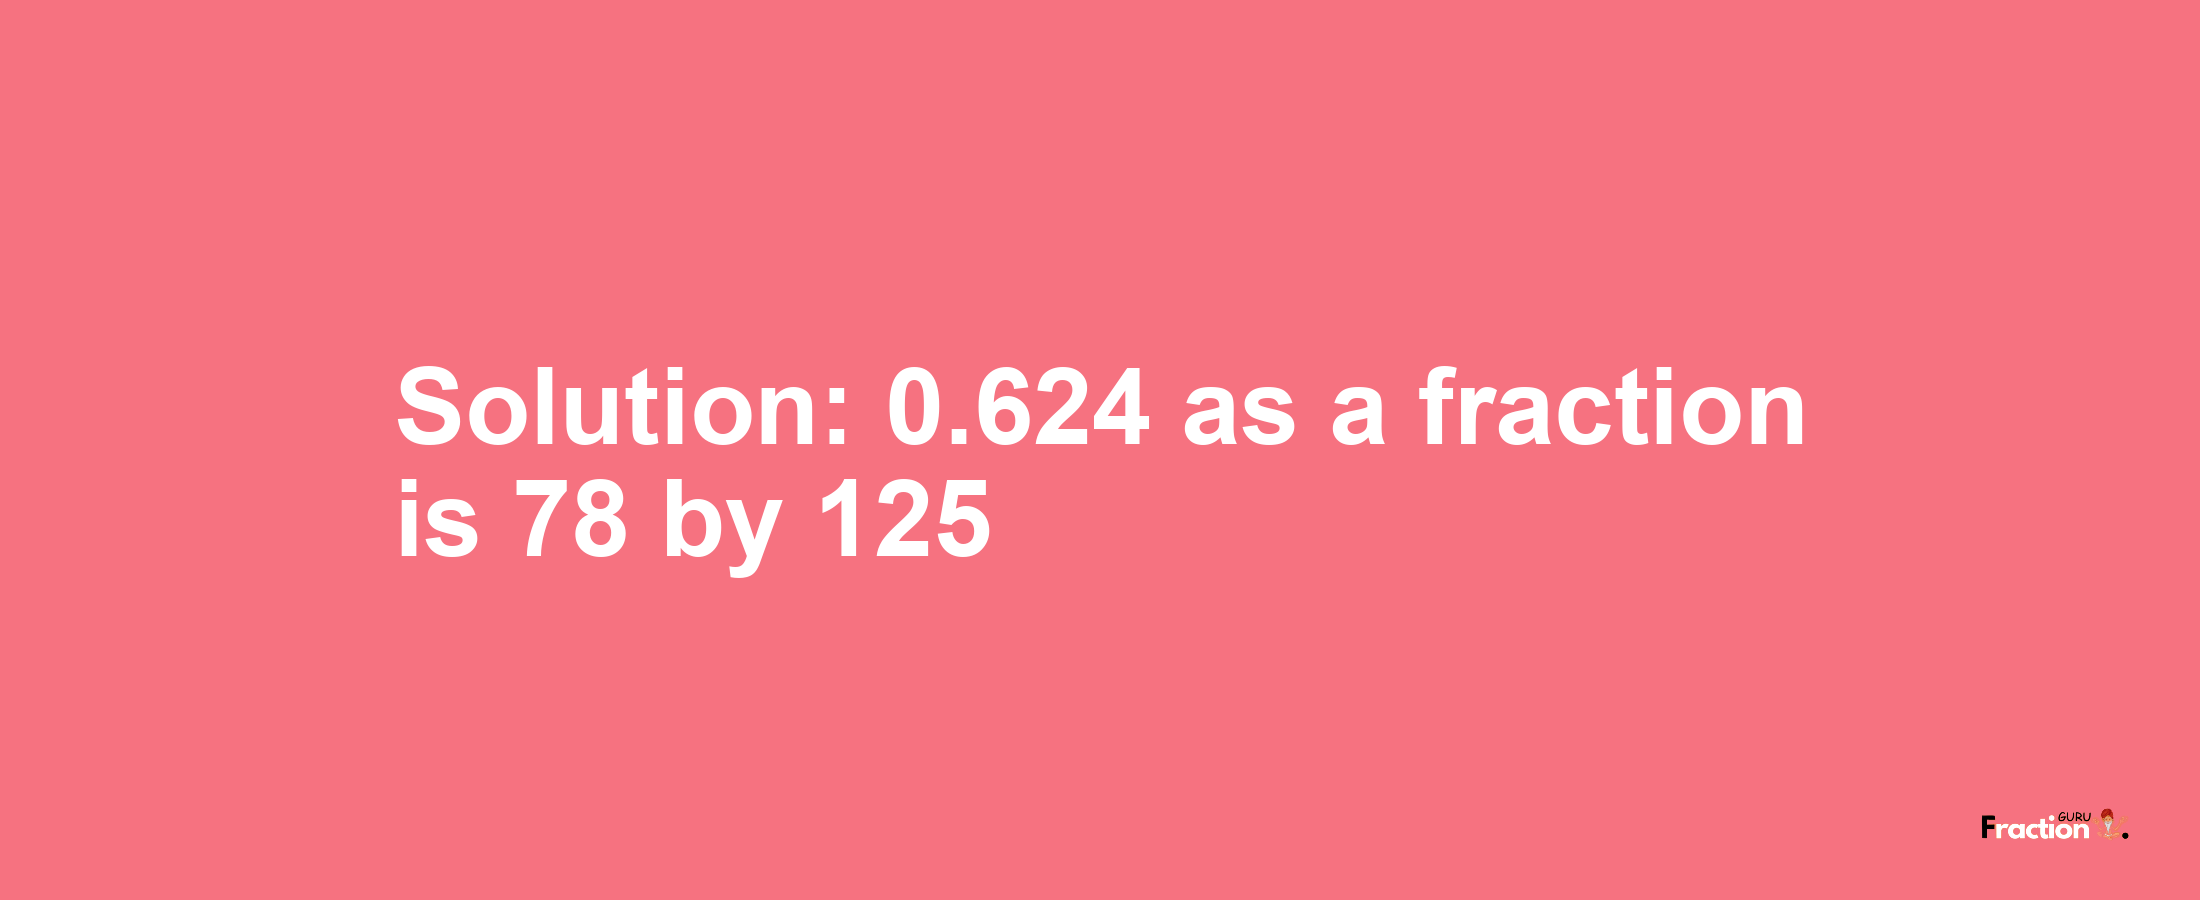 Solution:0.624 as a fraction is 78/125